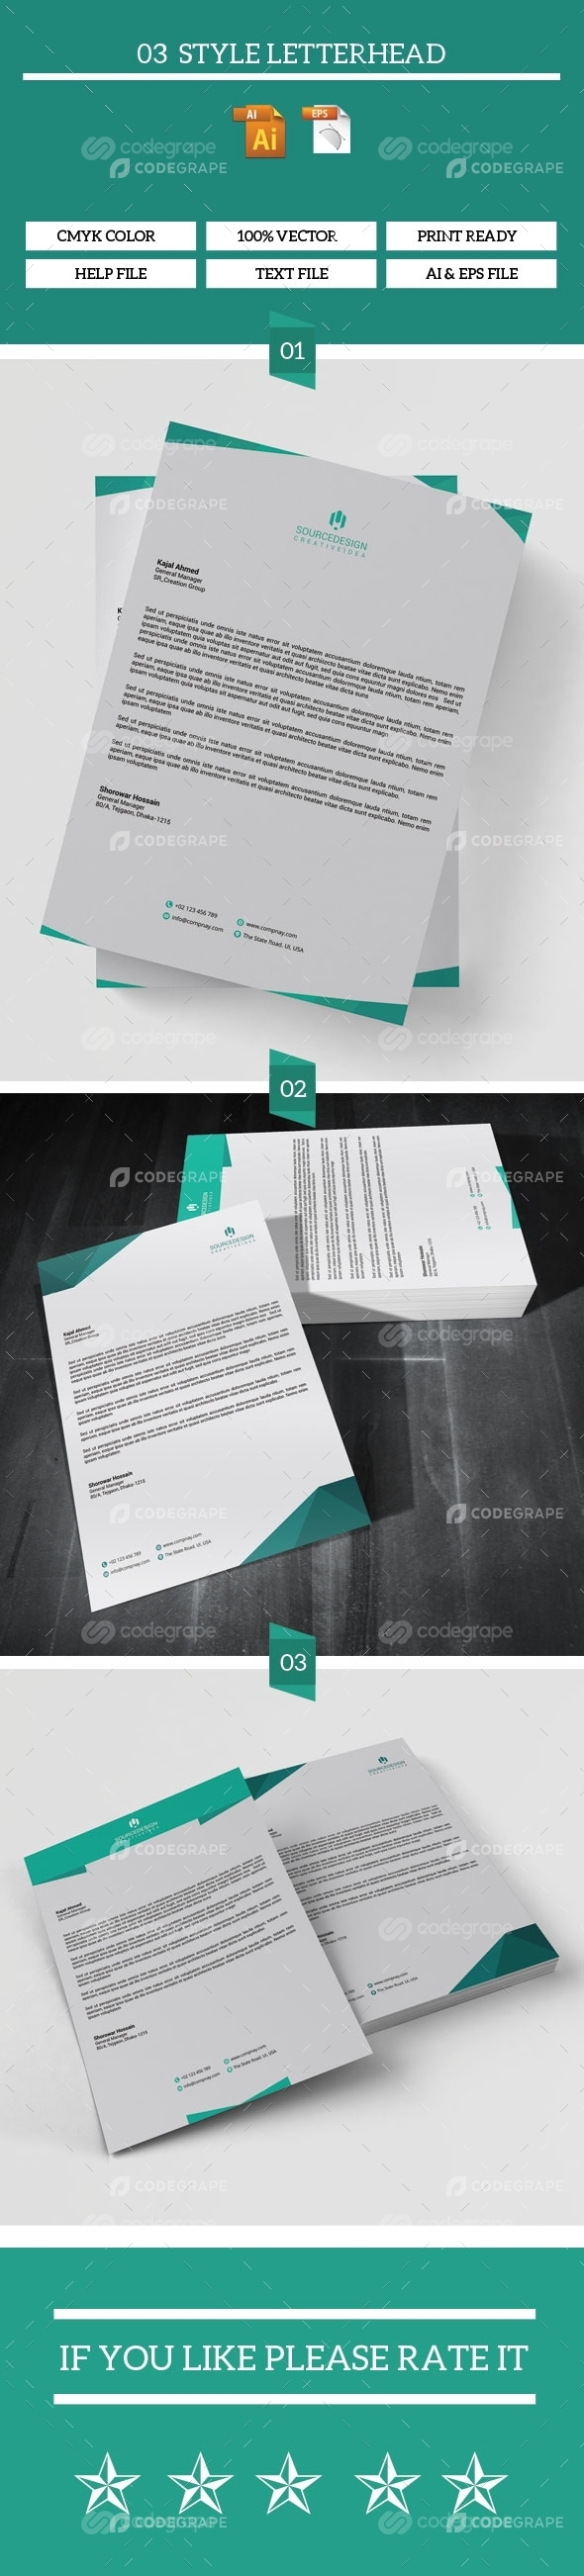 03 Different Style Letterhead Pack